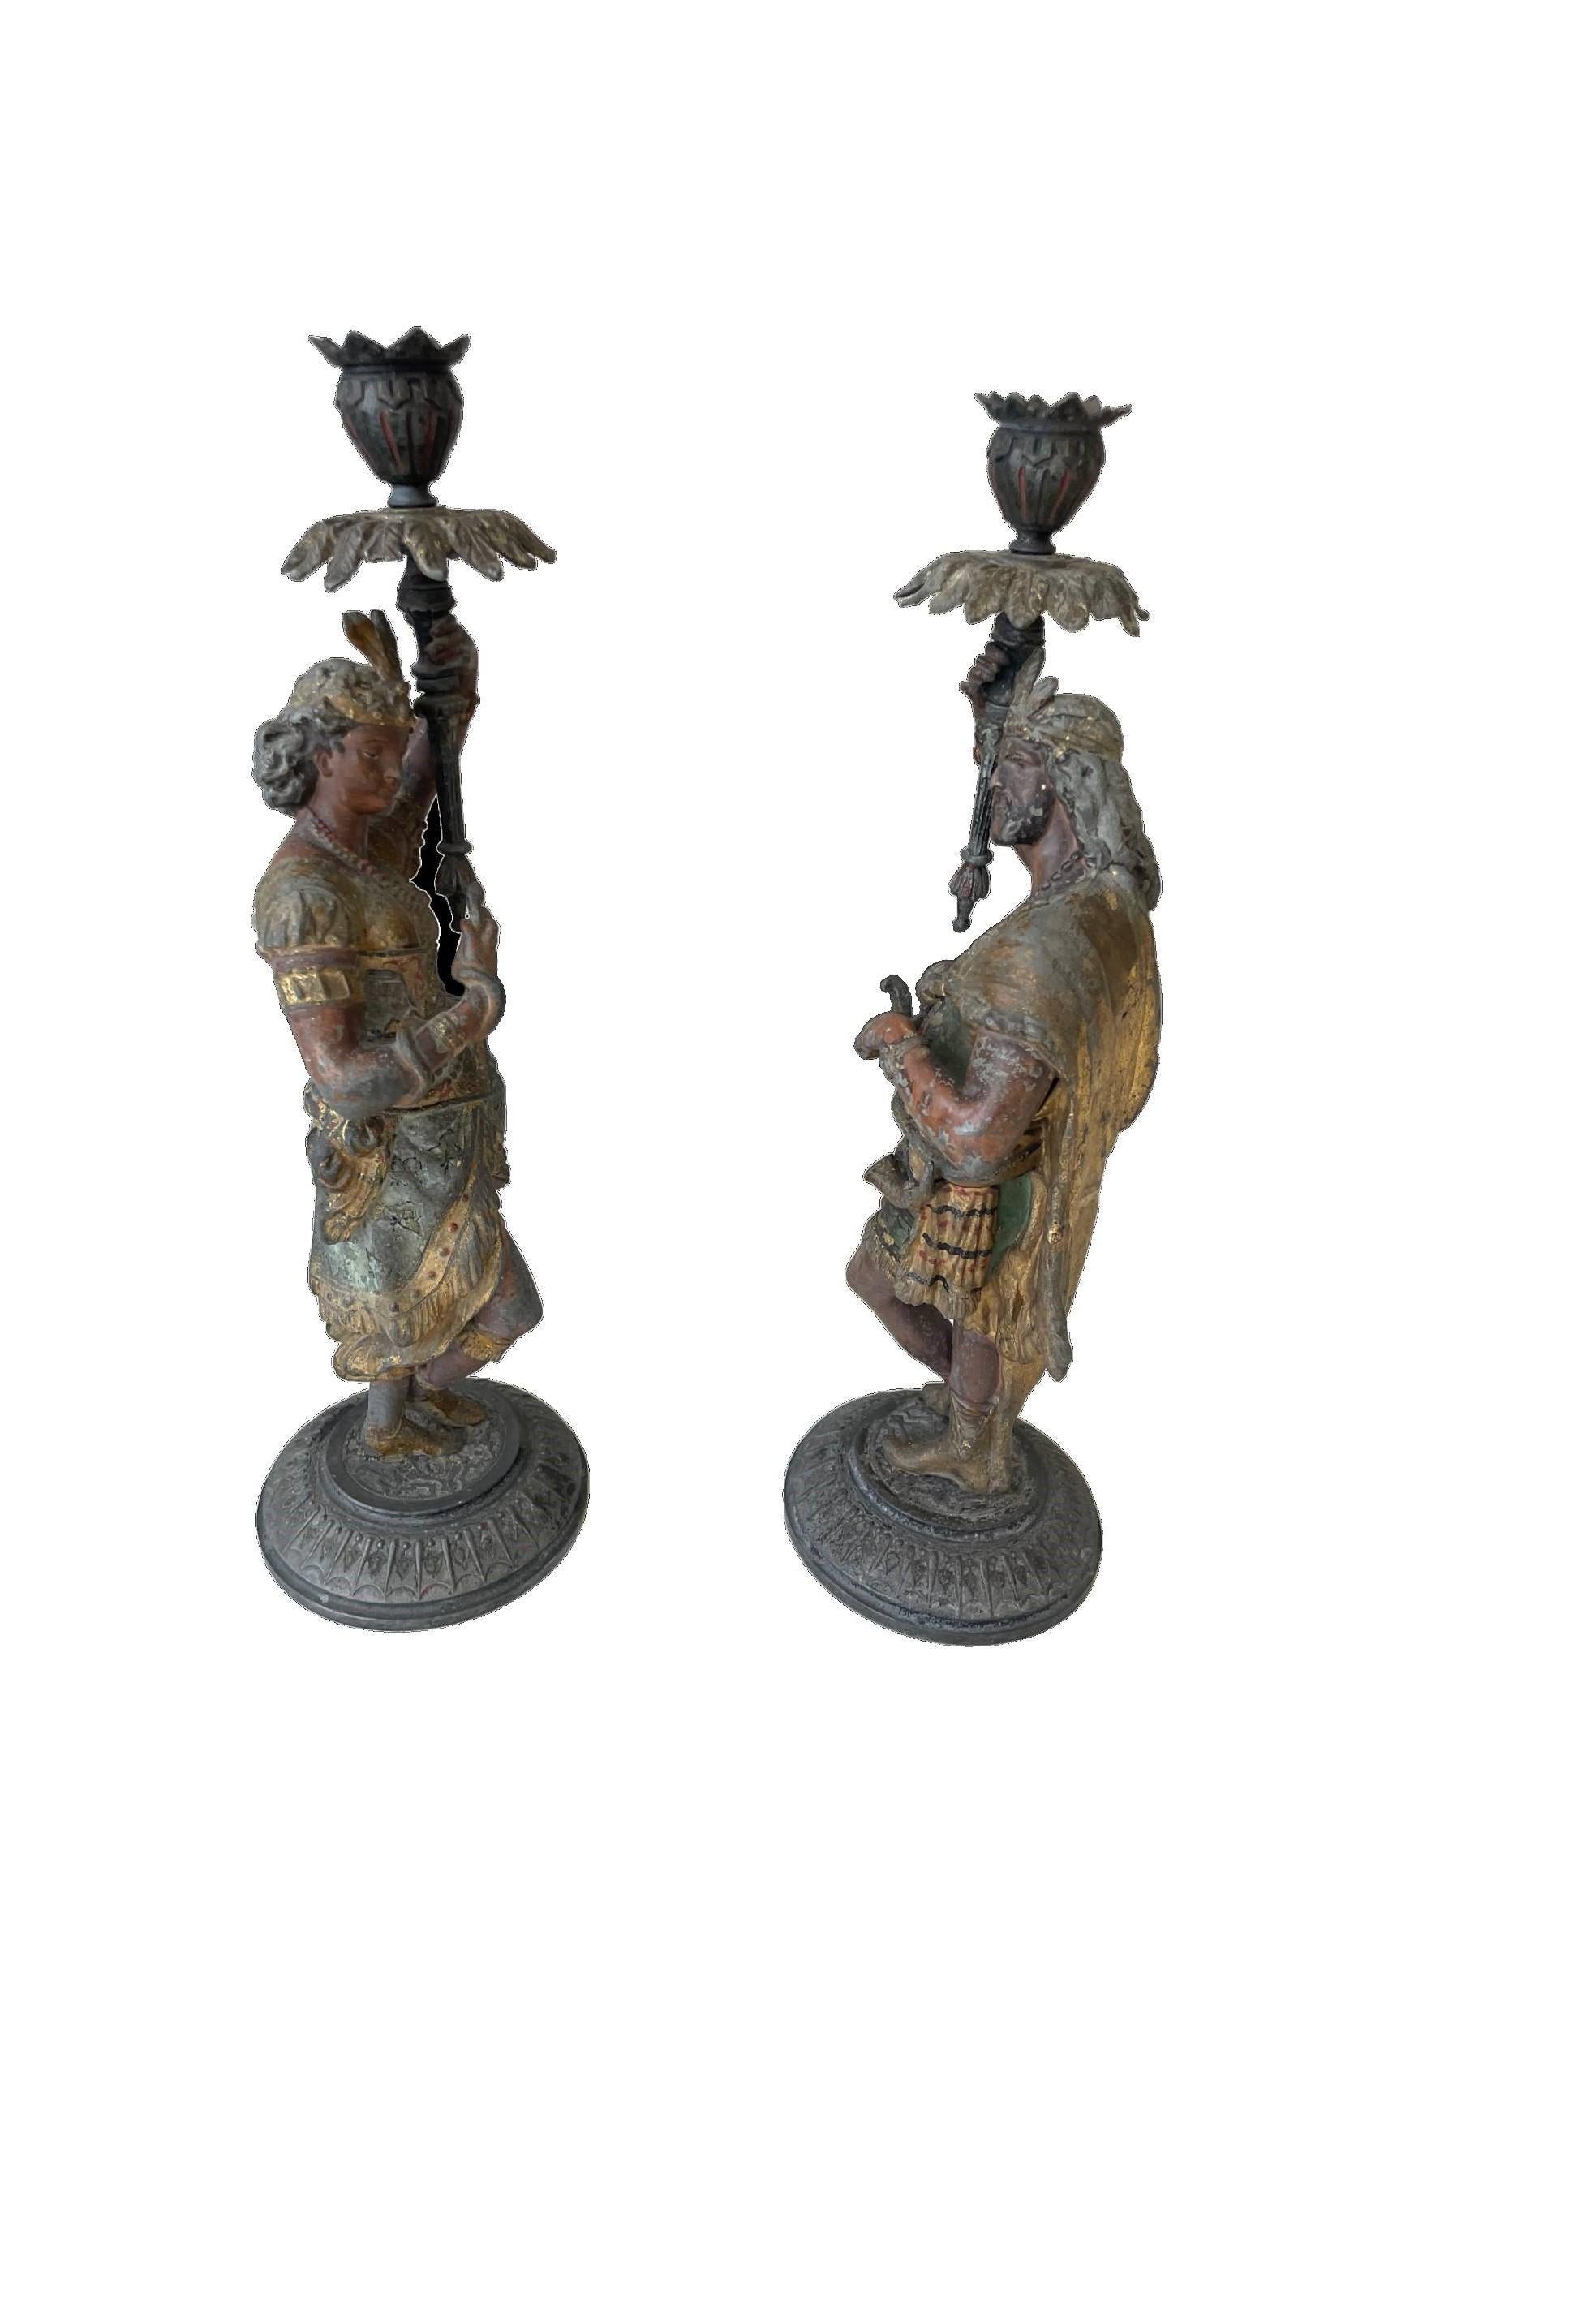 A strikingly impressive pair of figural candle holders, cast in the form of finely modelled Regal Indian male & female figures. Each standing atop circular bases and holding aloft floral shaped vessels serving as candle nozzles. Decorated overall